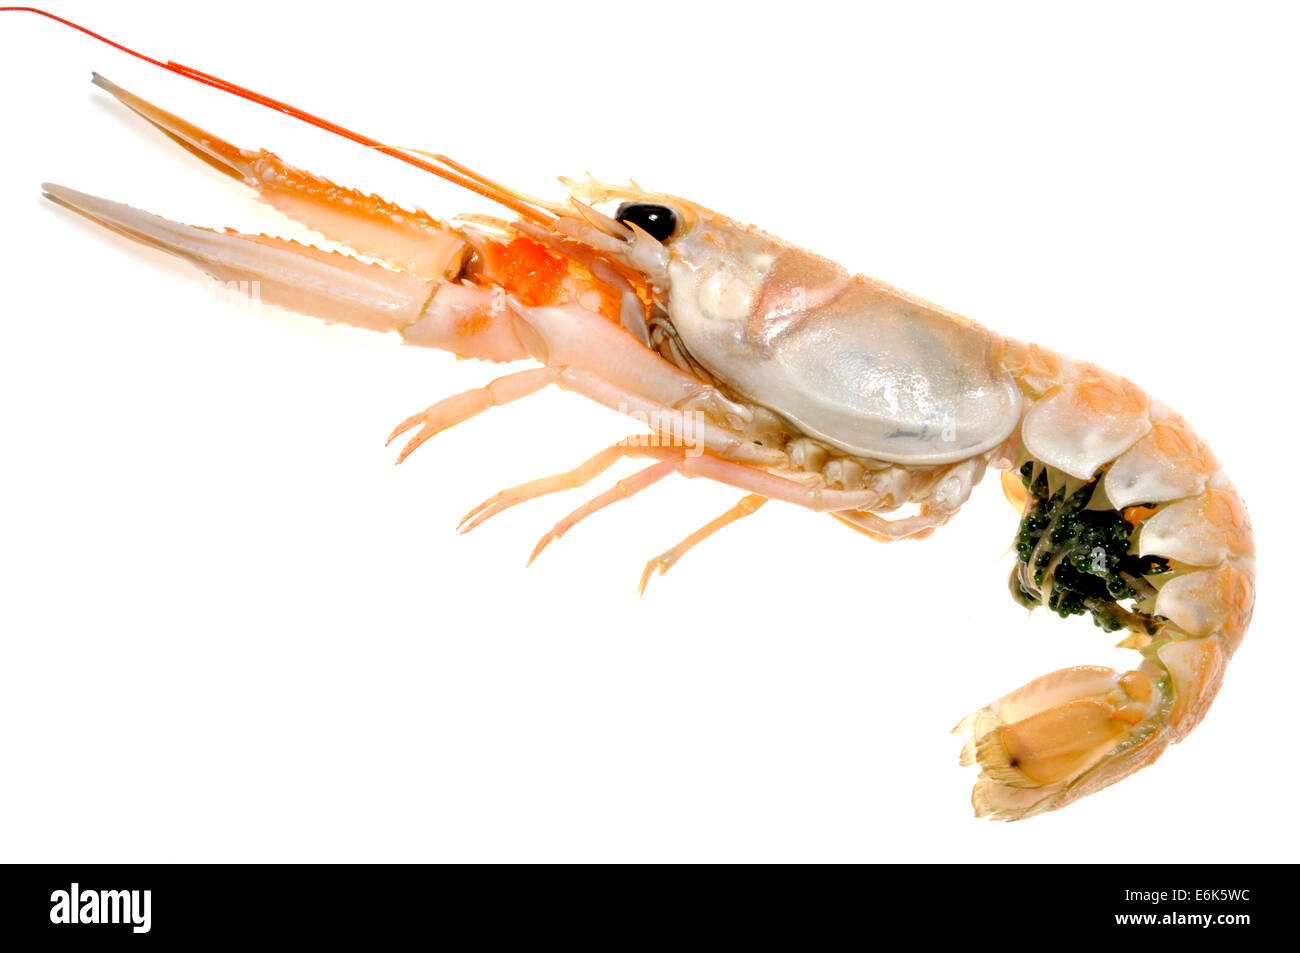 Raw Langoustine (Nephrops norvegicus) known as the Norway lobster, Dublin Bay prawn, or scampi - with eggs Stock Photo